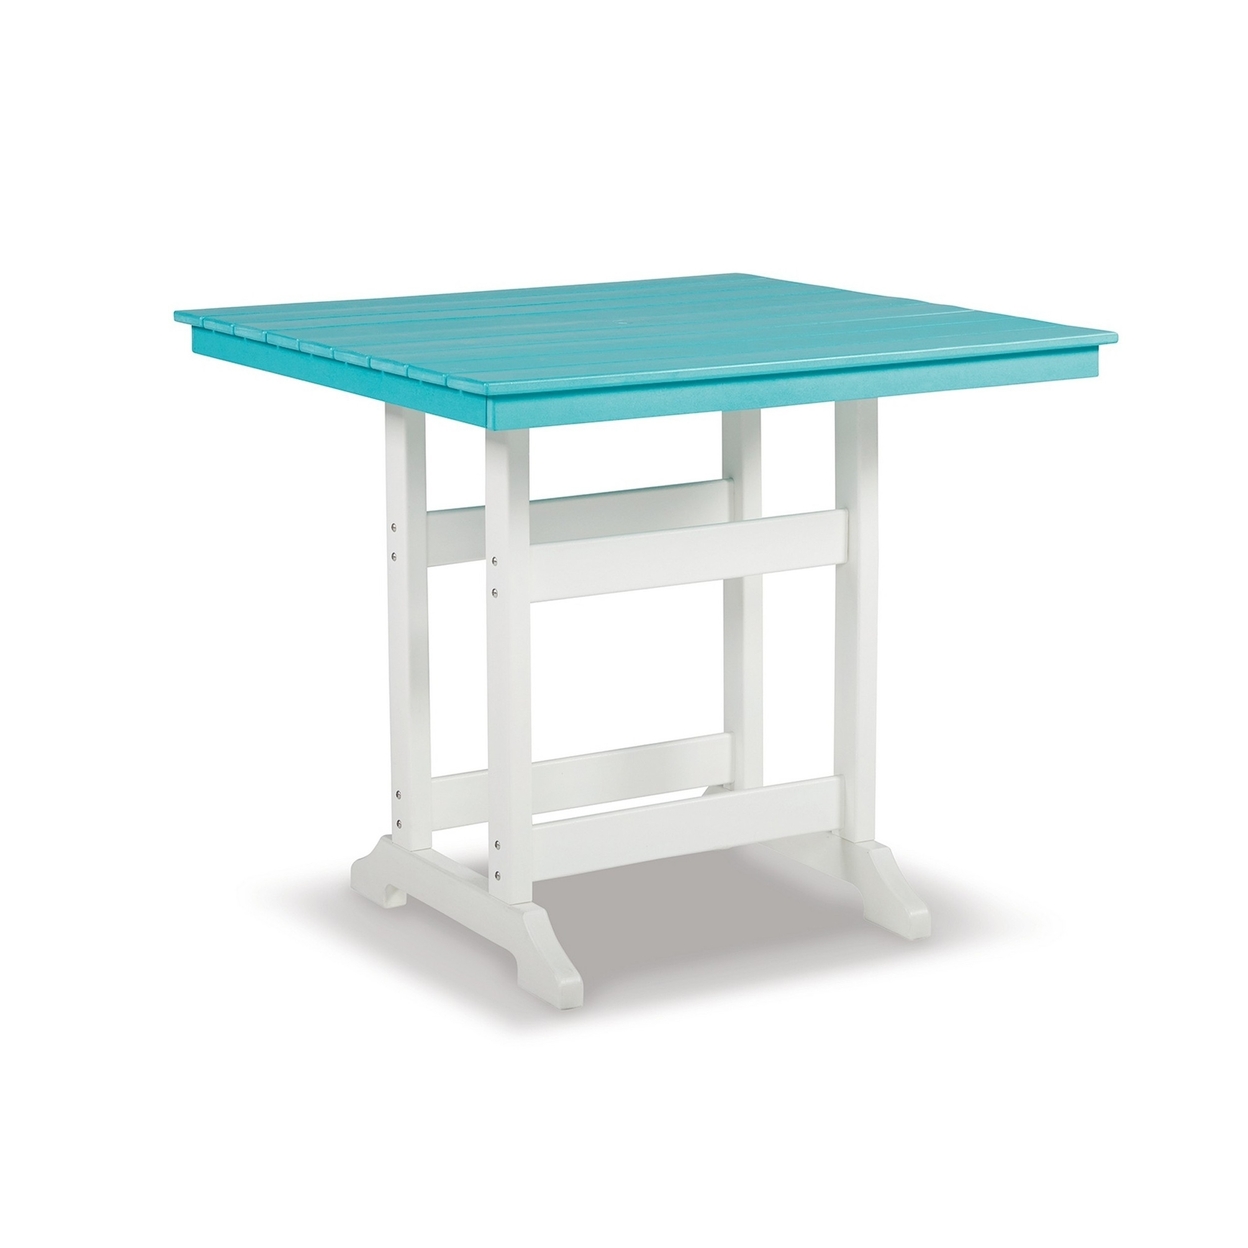 Ely 42 Inch Counter Height Dining Table, Outdoor Slatted, Turquoise, White - Saltoro Sherpi